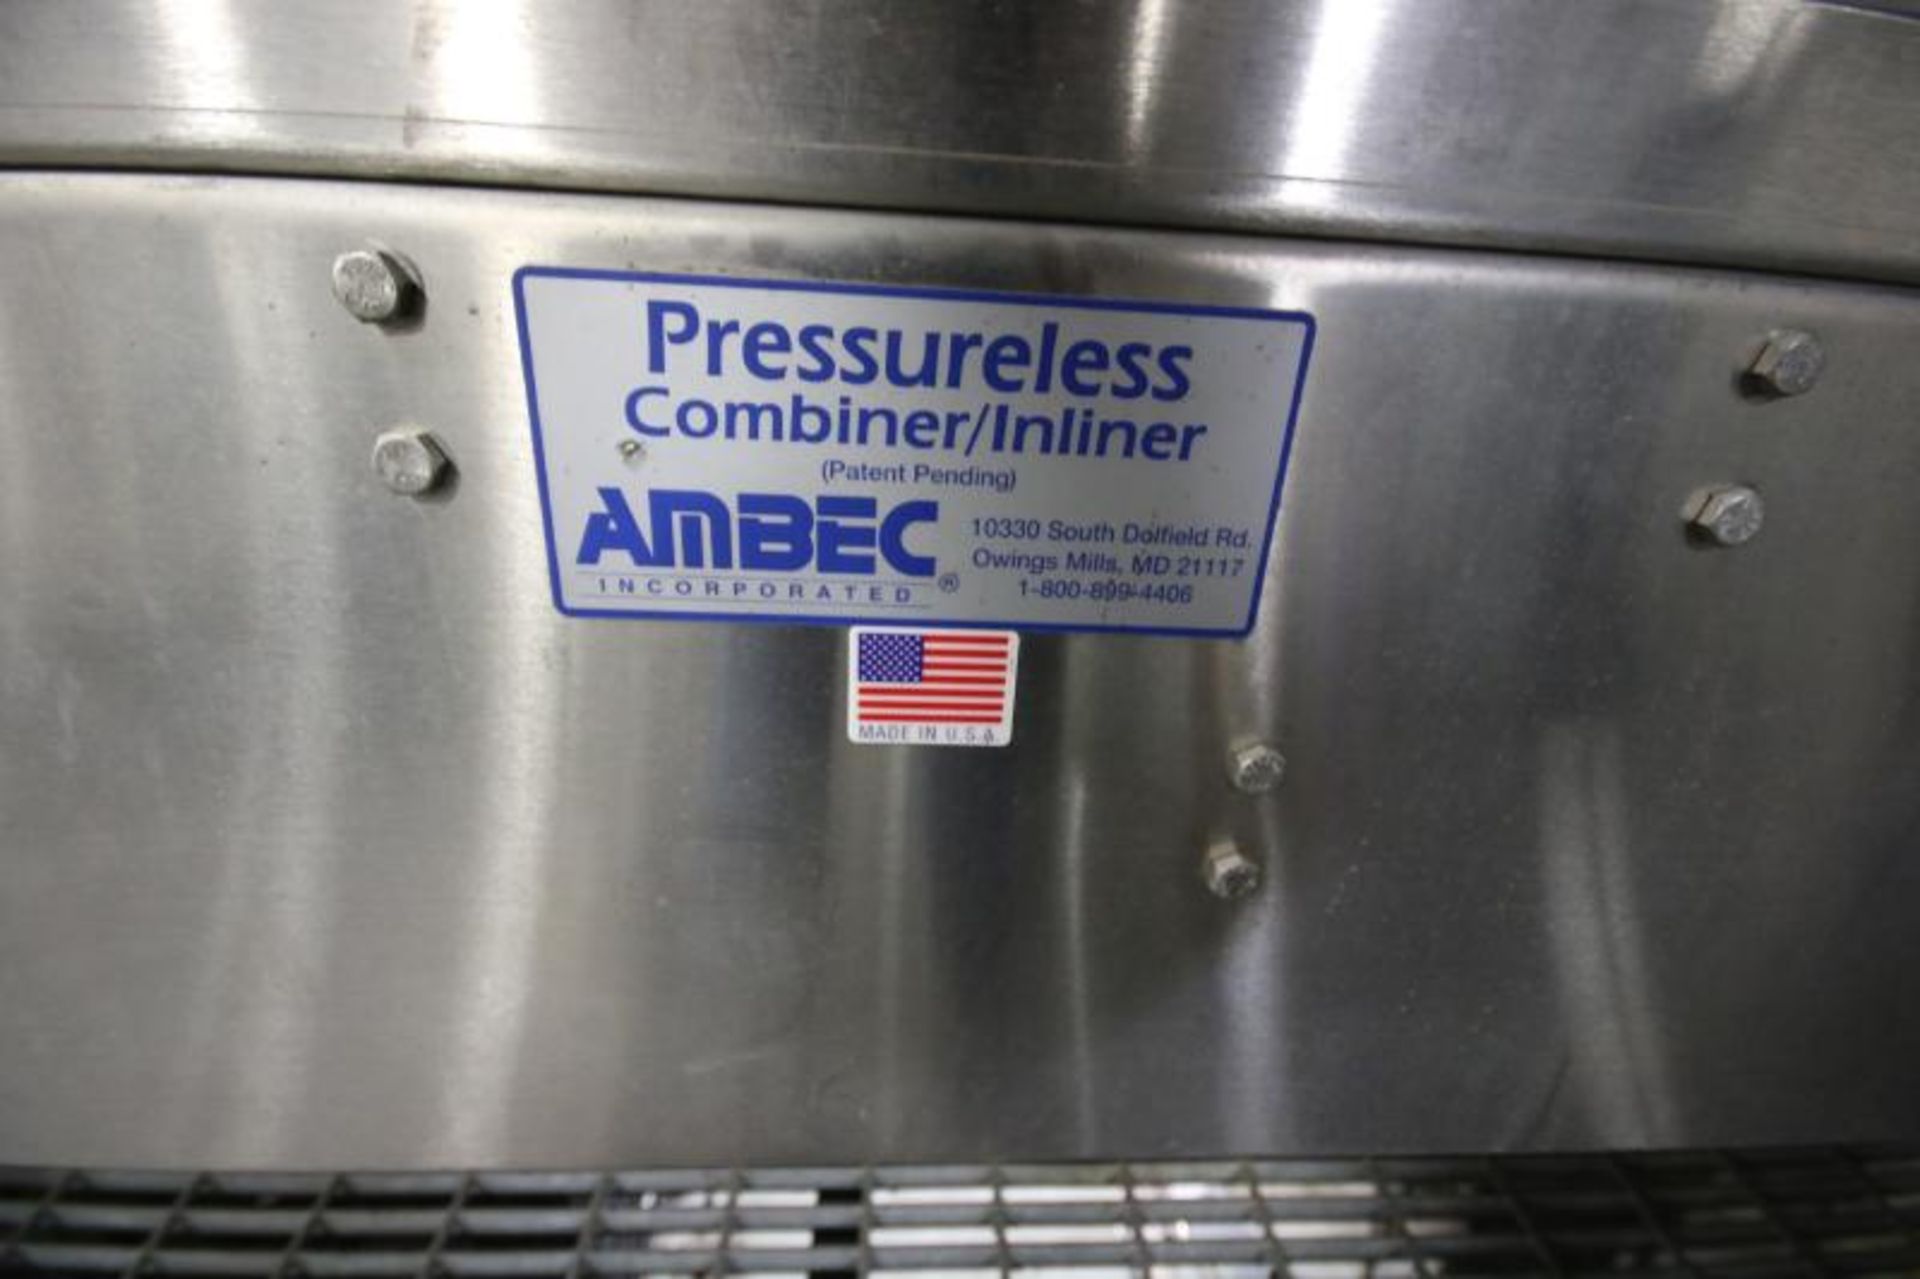 Ambec All S/S Combiner/Inliner/Single Filler, Aprox. 50 ft. L x 4" W Up to 50" W with Adjustable - Image 8 of 8